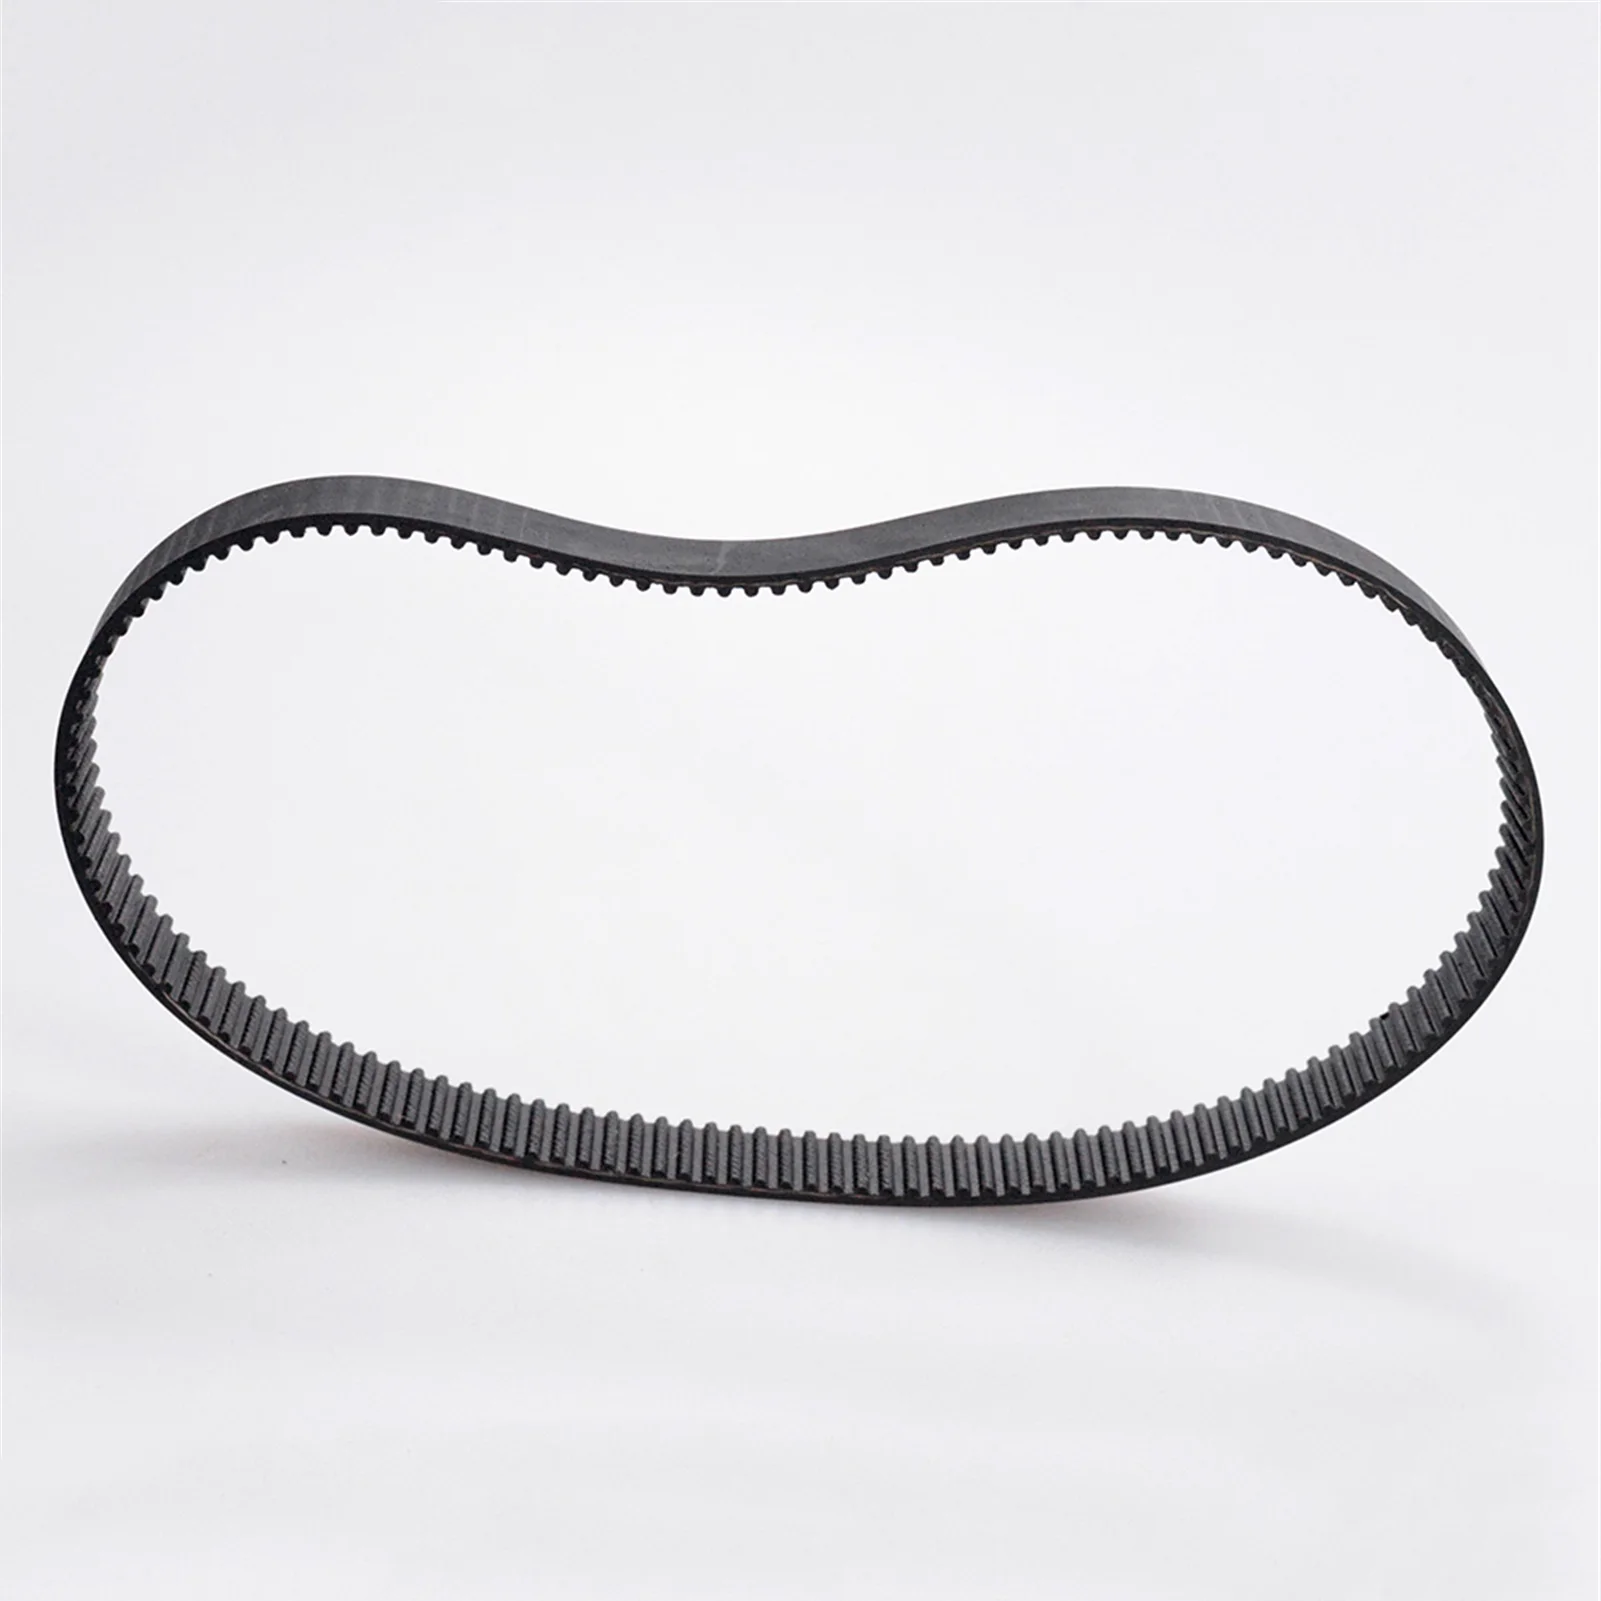 

HTD3M Closed Loop Synchronous Timing Belt, LENGTH 375/378/381/384/390/393/396/399mm, 6/9/10/15mm Width, Rubber Toothed Belt,